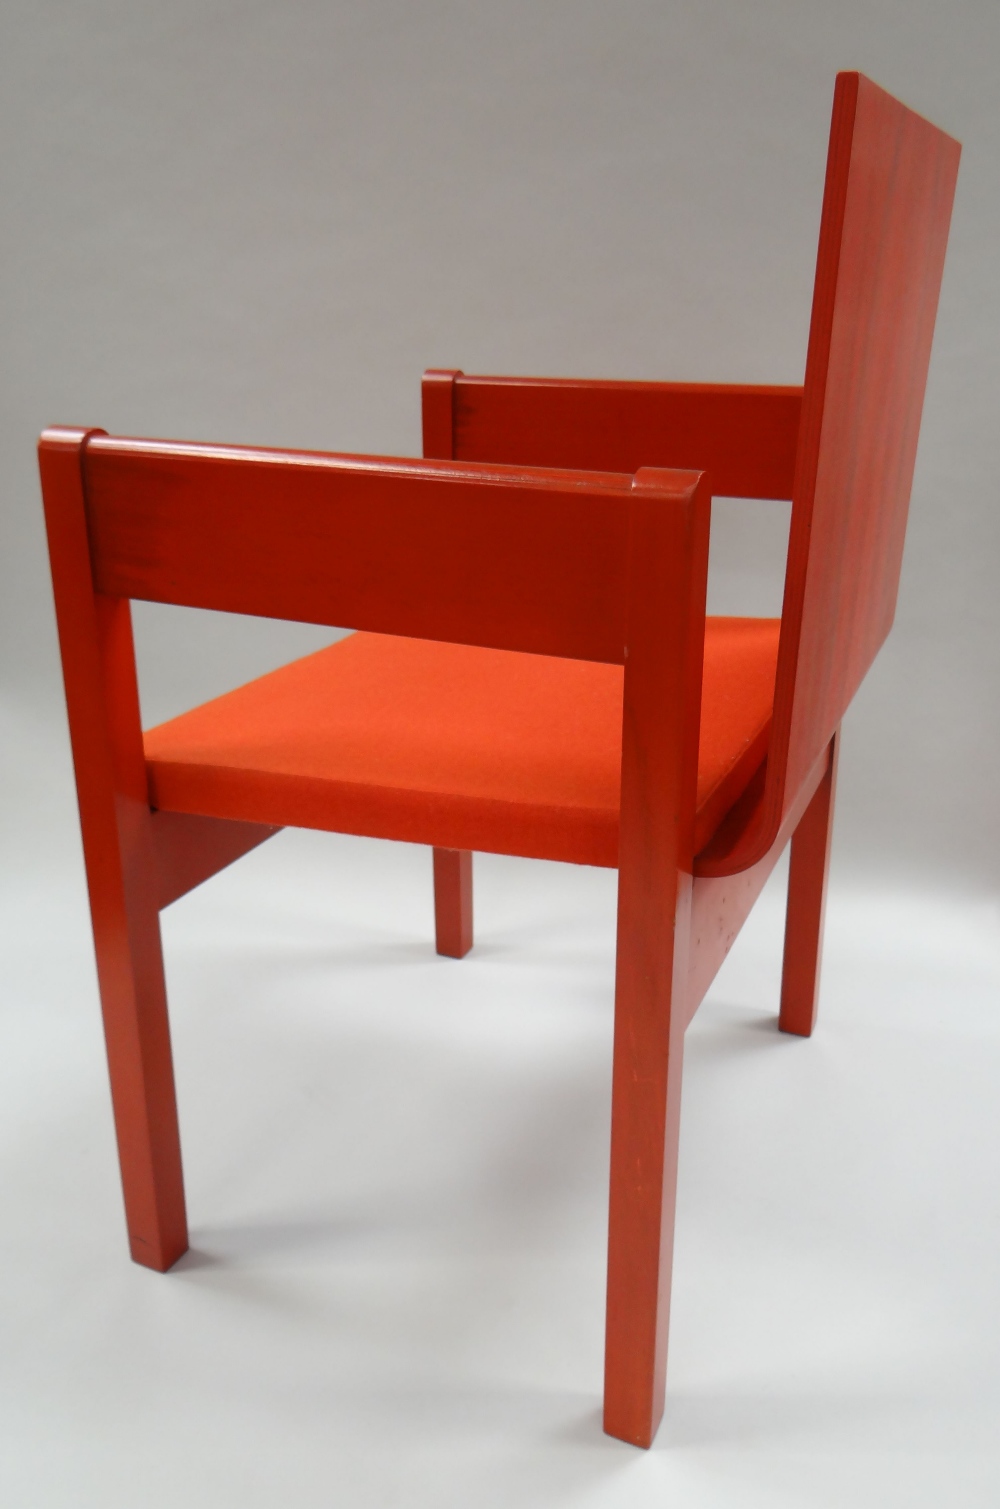 AN INVESTITURE CHAIR an icon of design being the 1969 Prince of Wales Investiture chair by Lord - Image 4 of 4